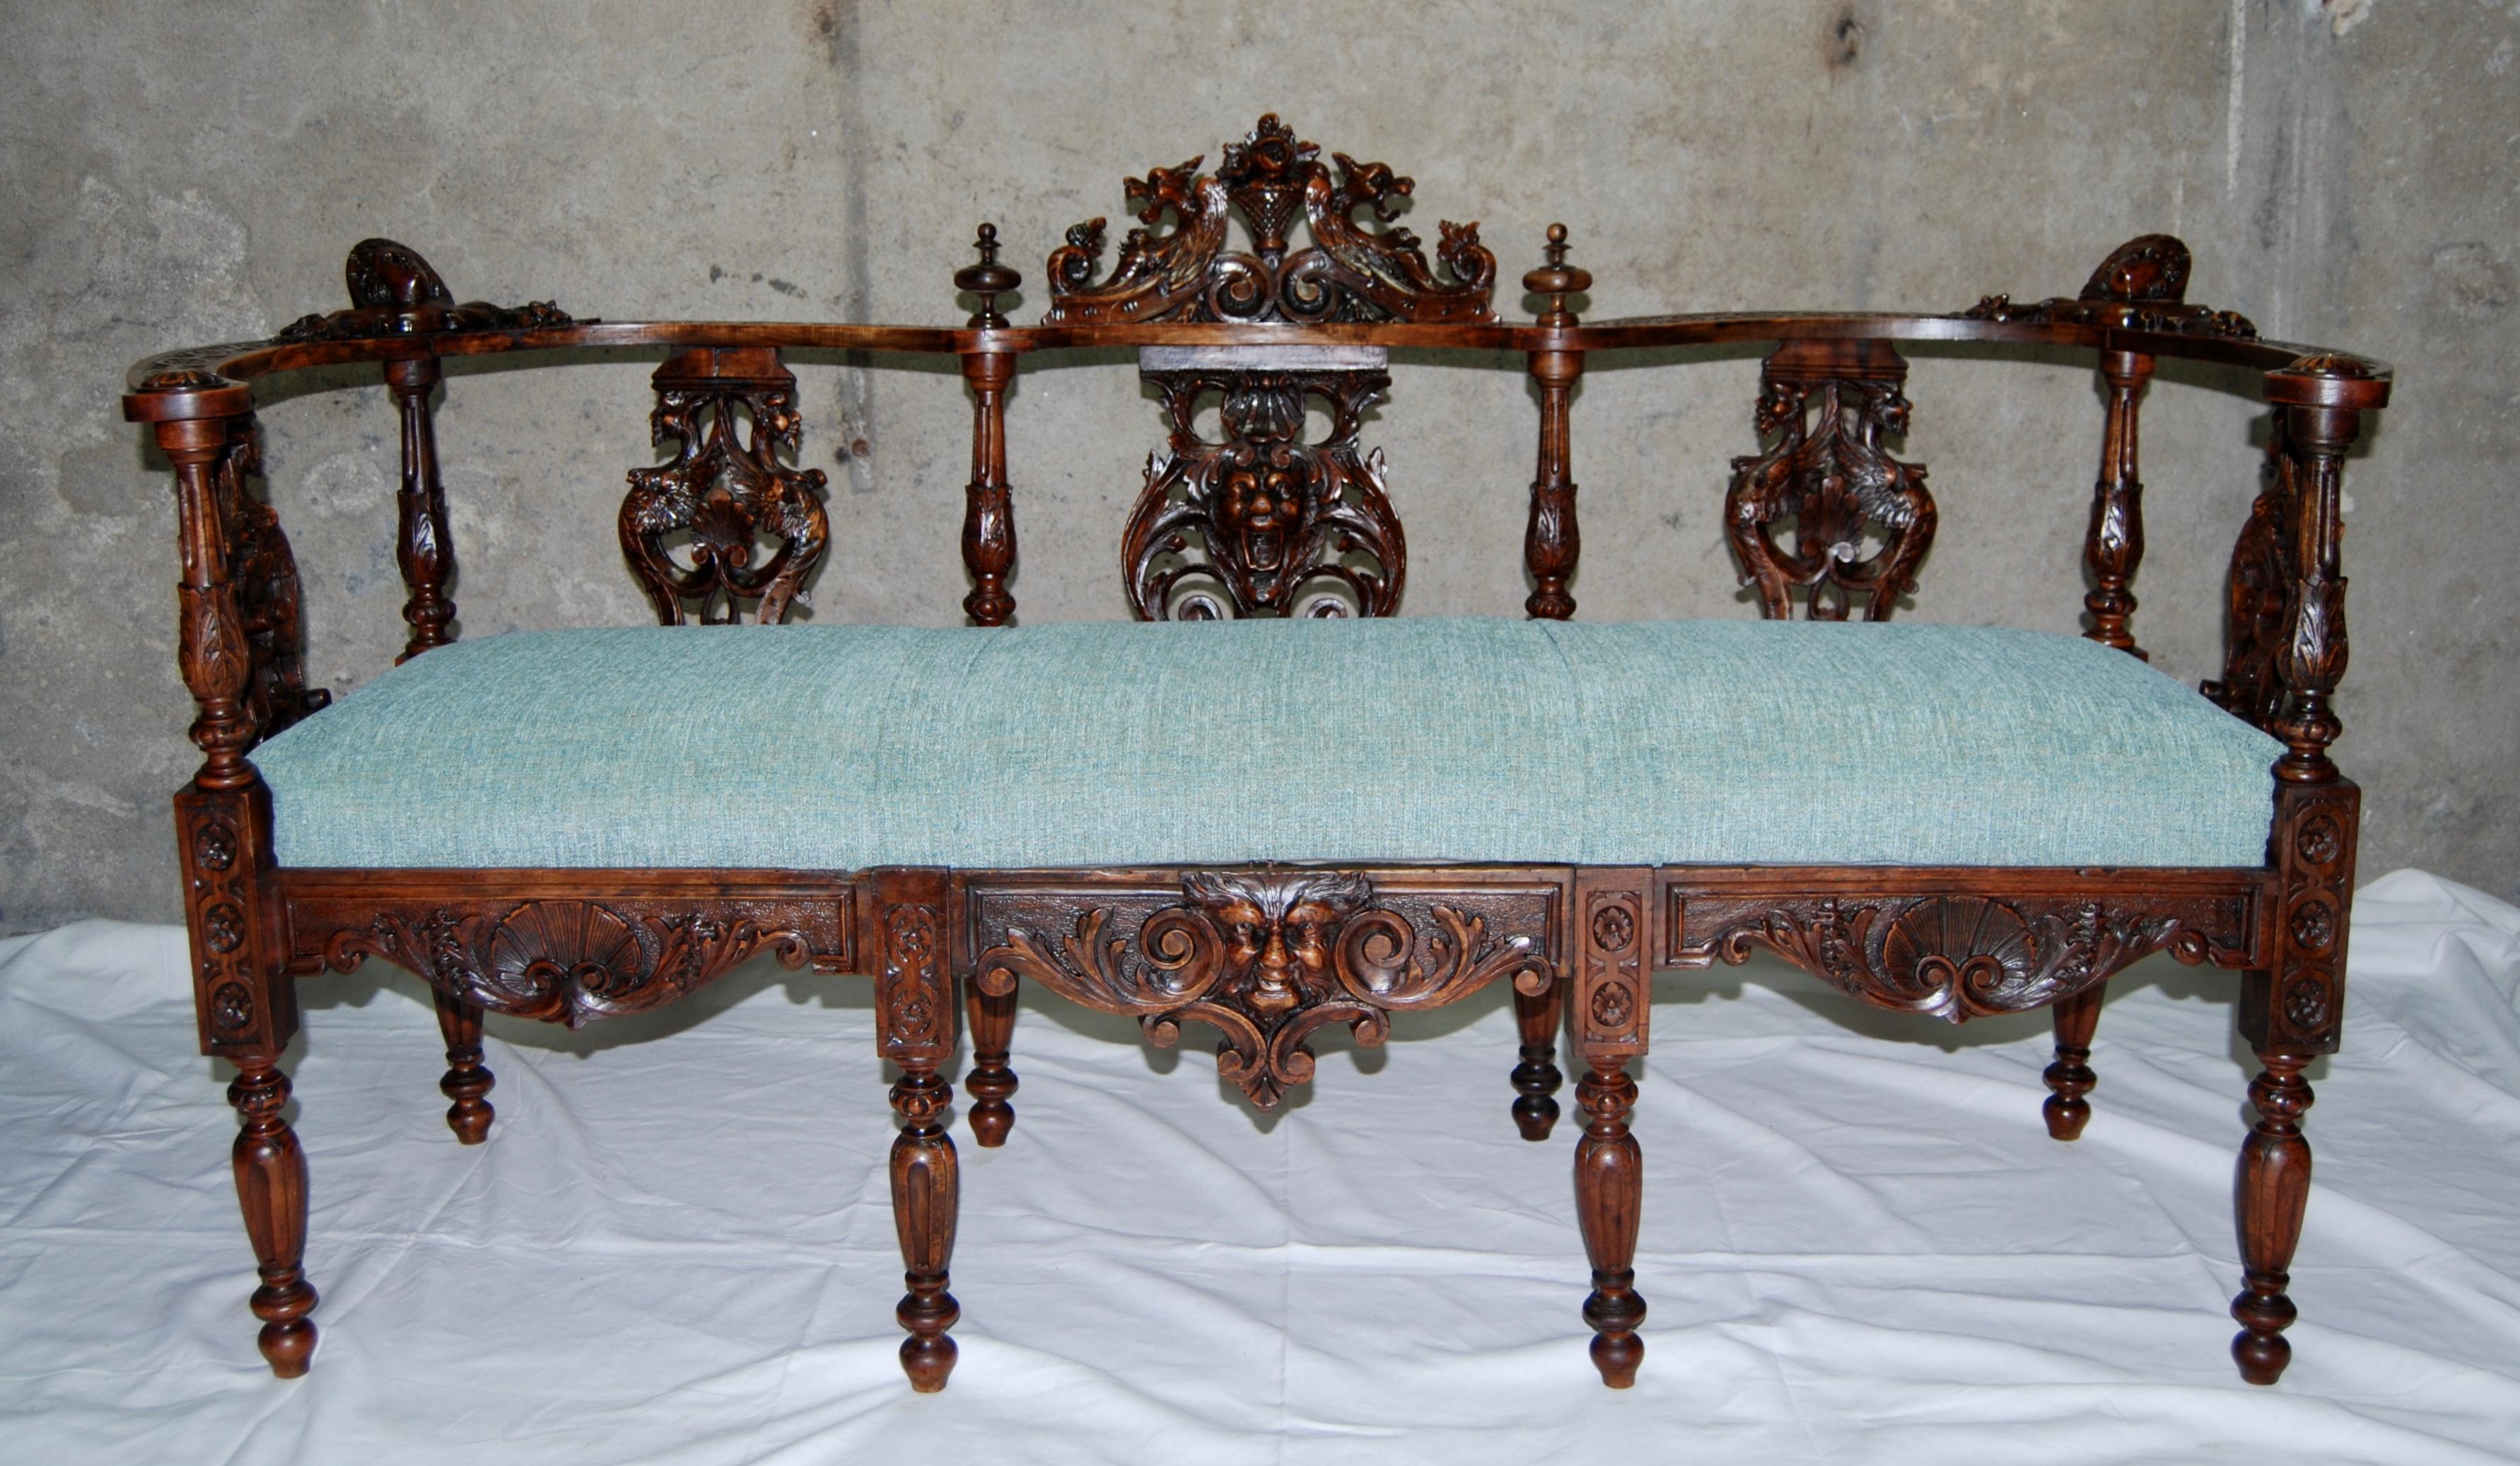 A rare and extraordinary neo-renaissance banquette in hand-carved walnut
Dating back to the 1850s, this magnificent sofa is richly decorated with flowers, leaves, shells, griffins and chimeras which are enhanced by the rich patina that has